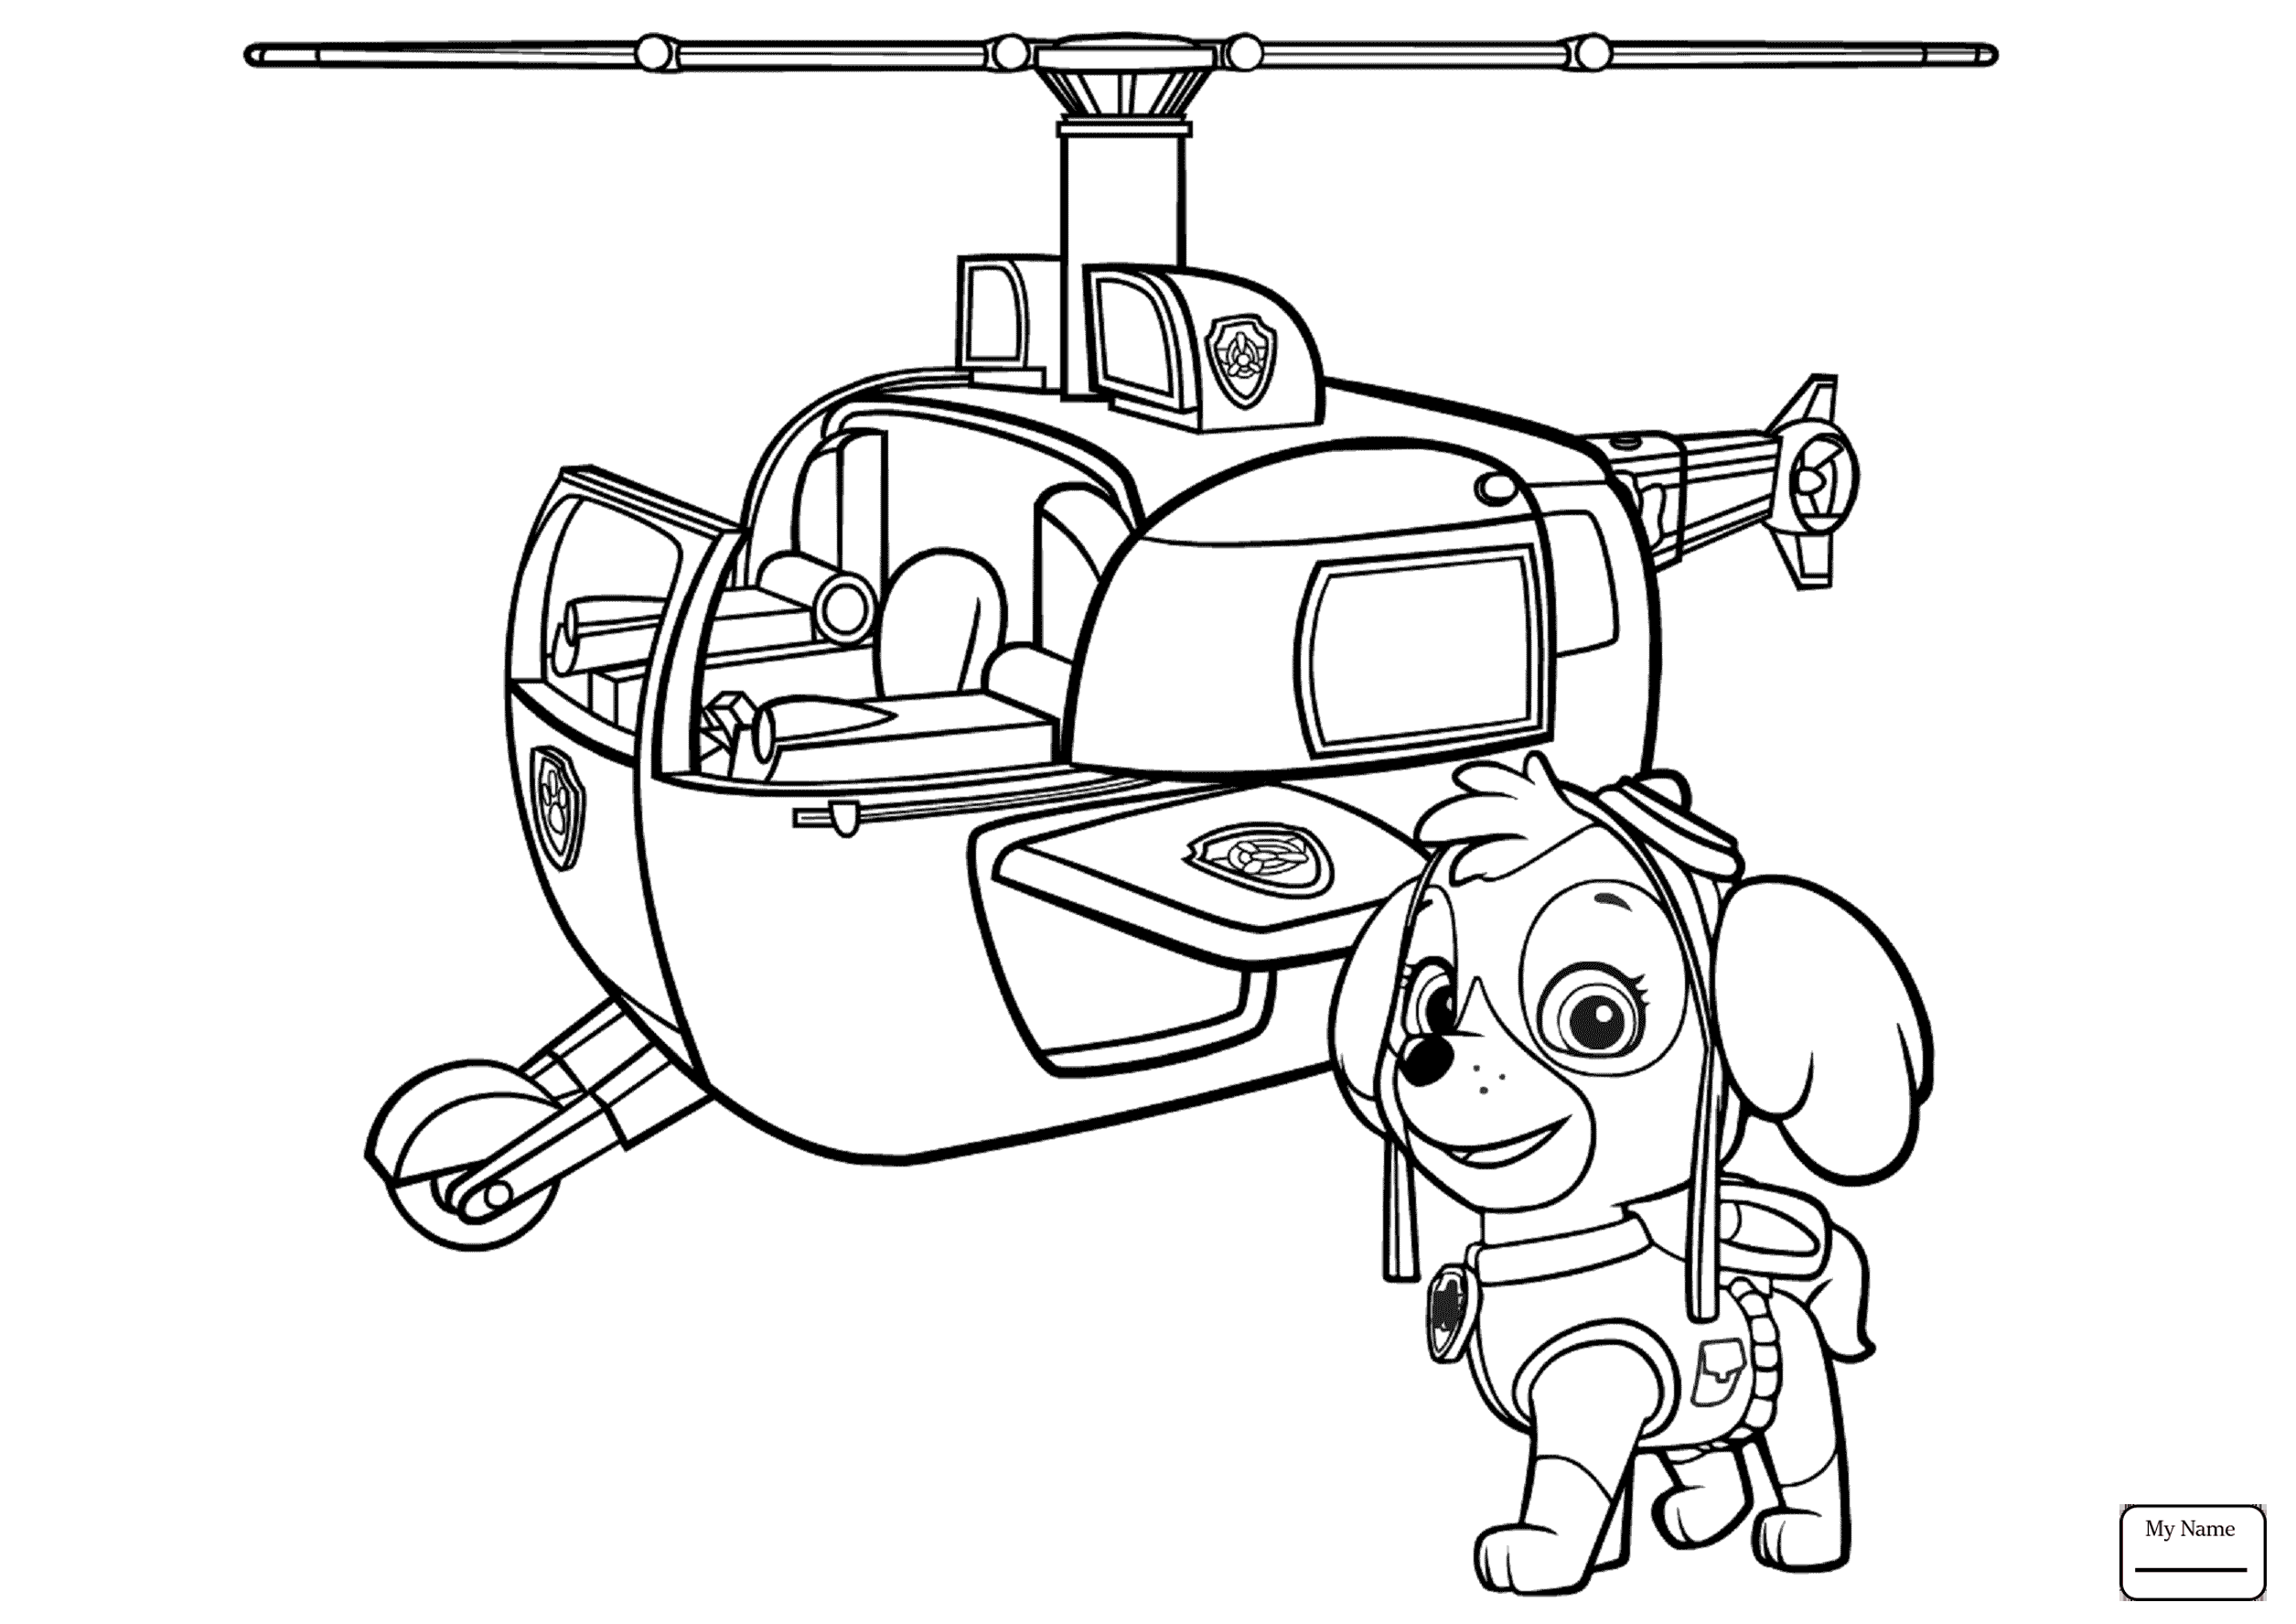 Paw Patrol Everest Coloring Page at GetColoringscom